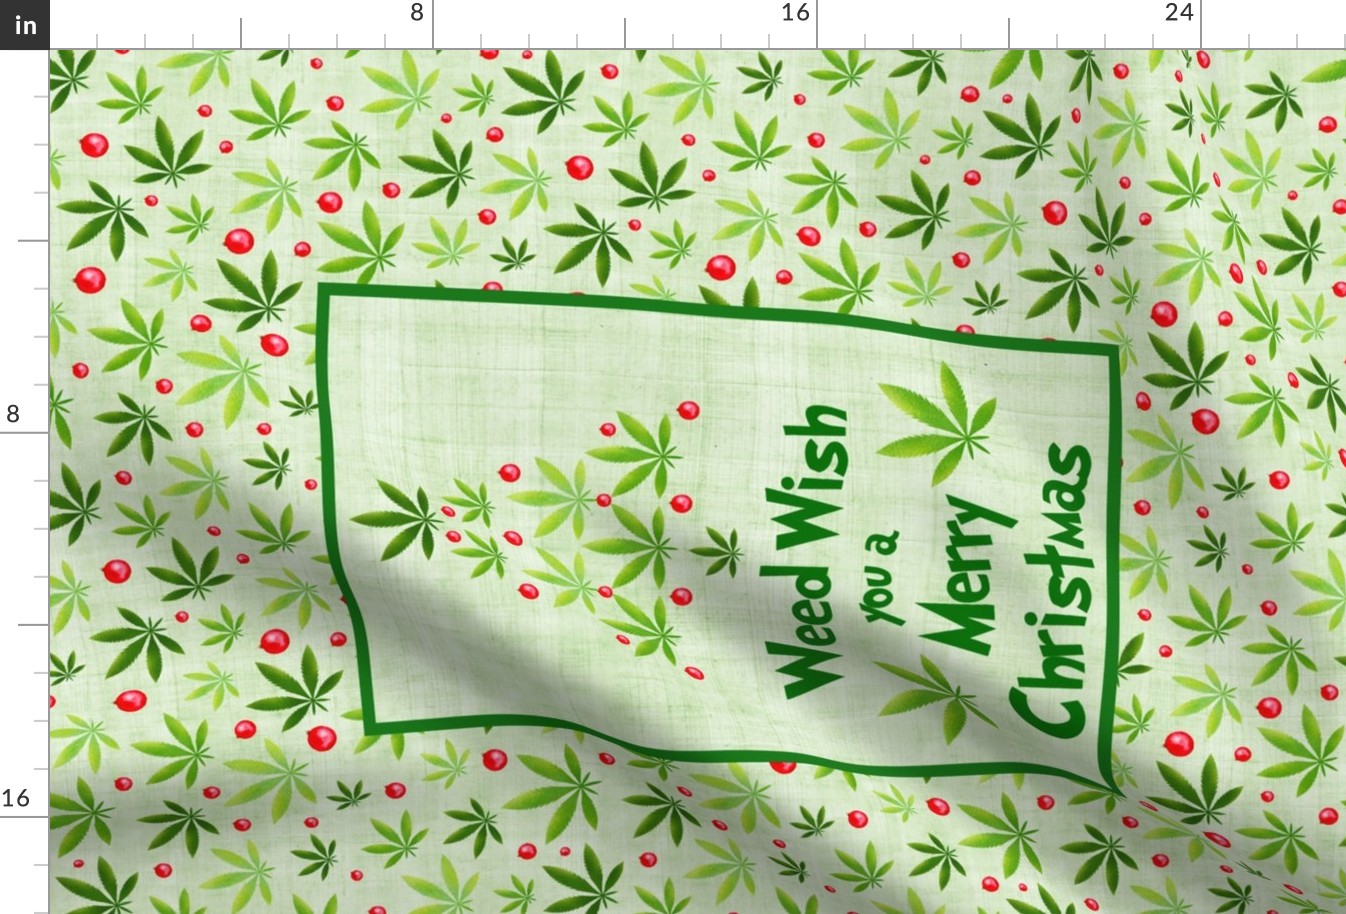 Large 27x18 Fat Quarter Panel for Wall Art or Tea Towel Weed Wish You a Merry Christmas Holiday Greenery and Ornaments Marijuana Pot Plant Humorous Holidays Indoor Garden Wall Hanging